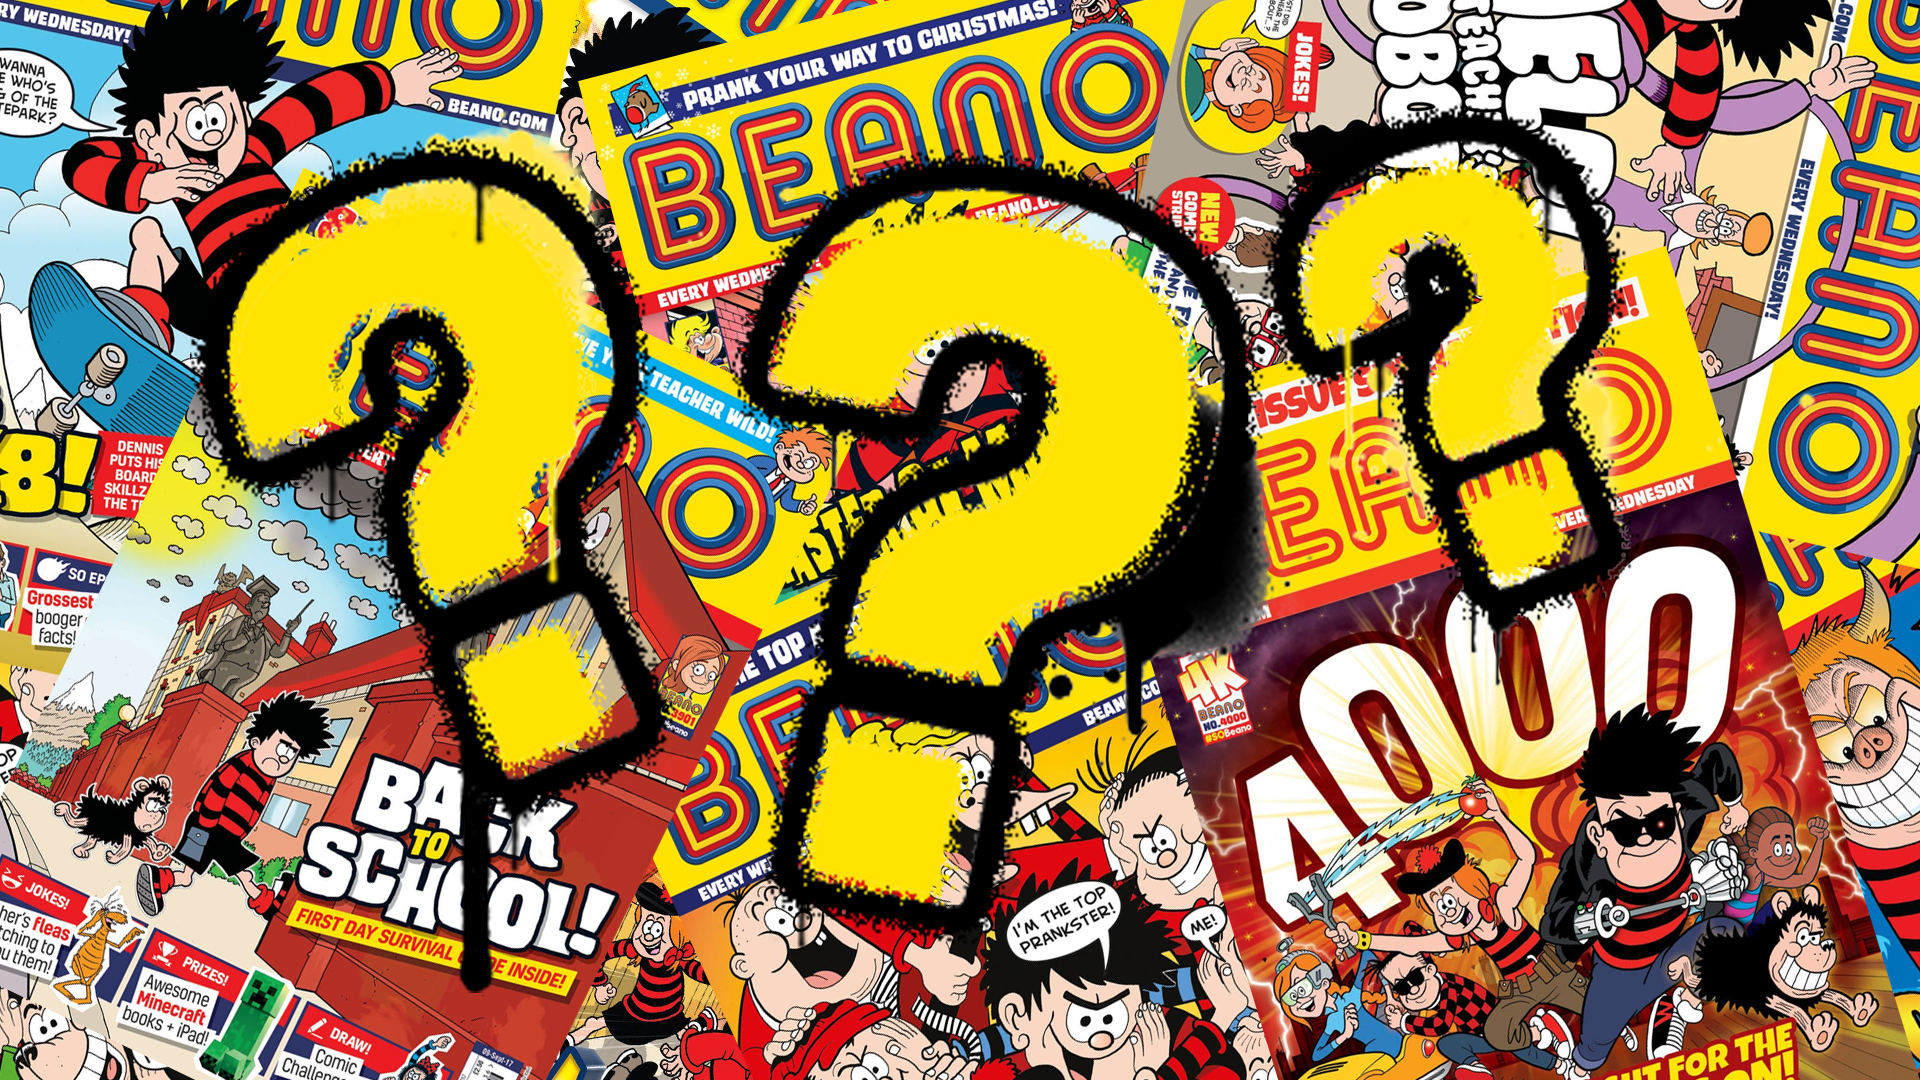 Beano comics and question marks